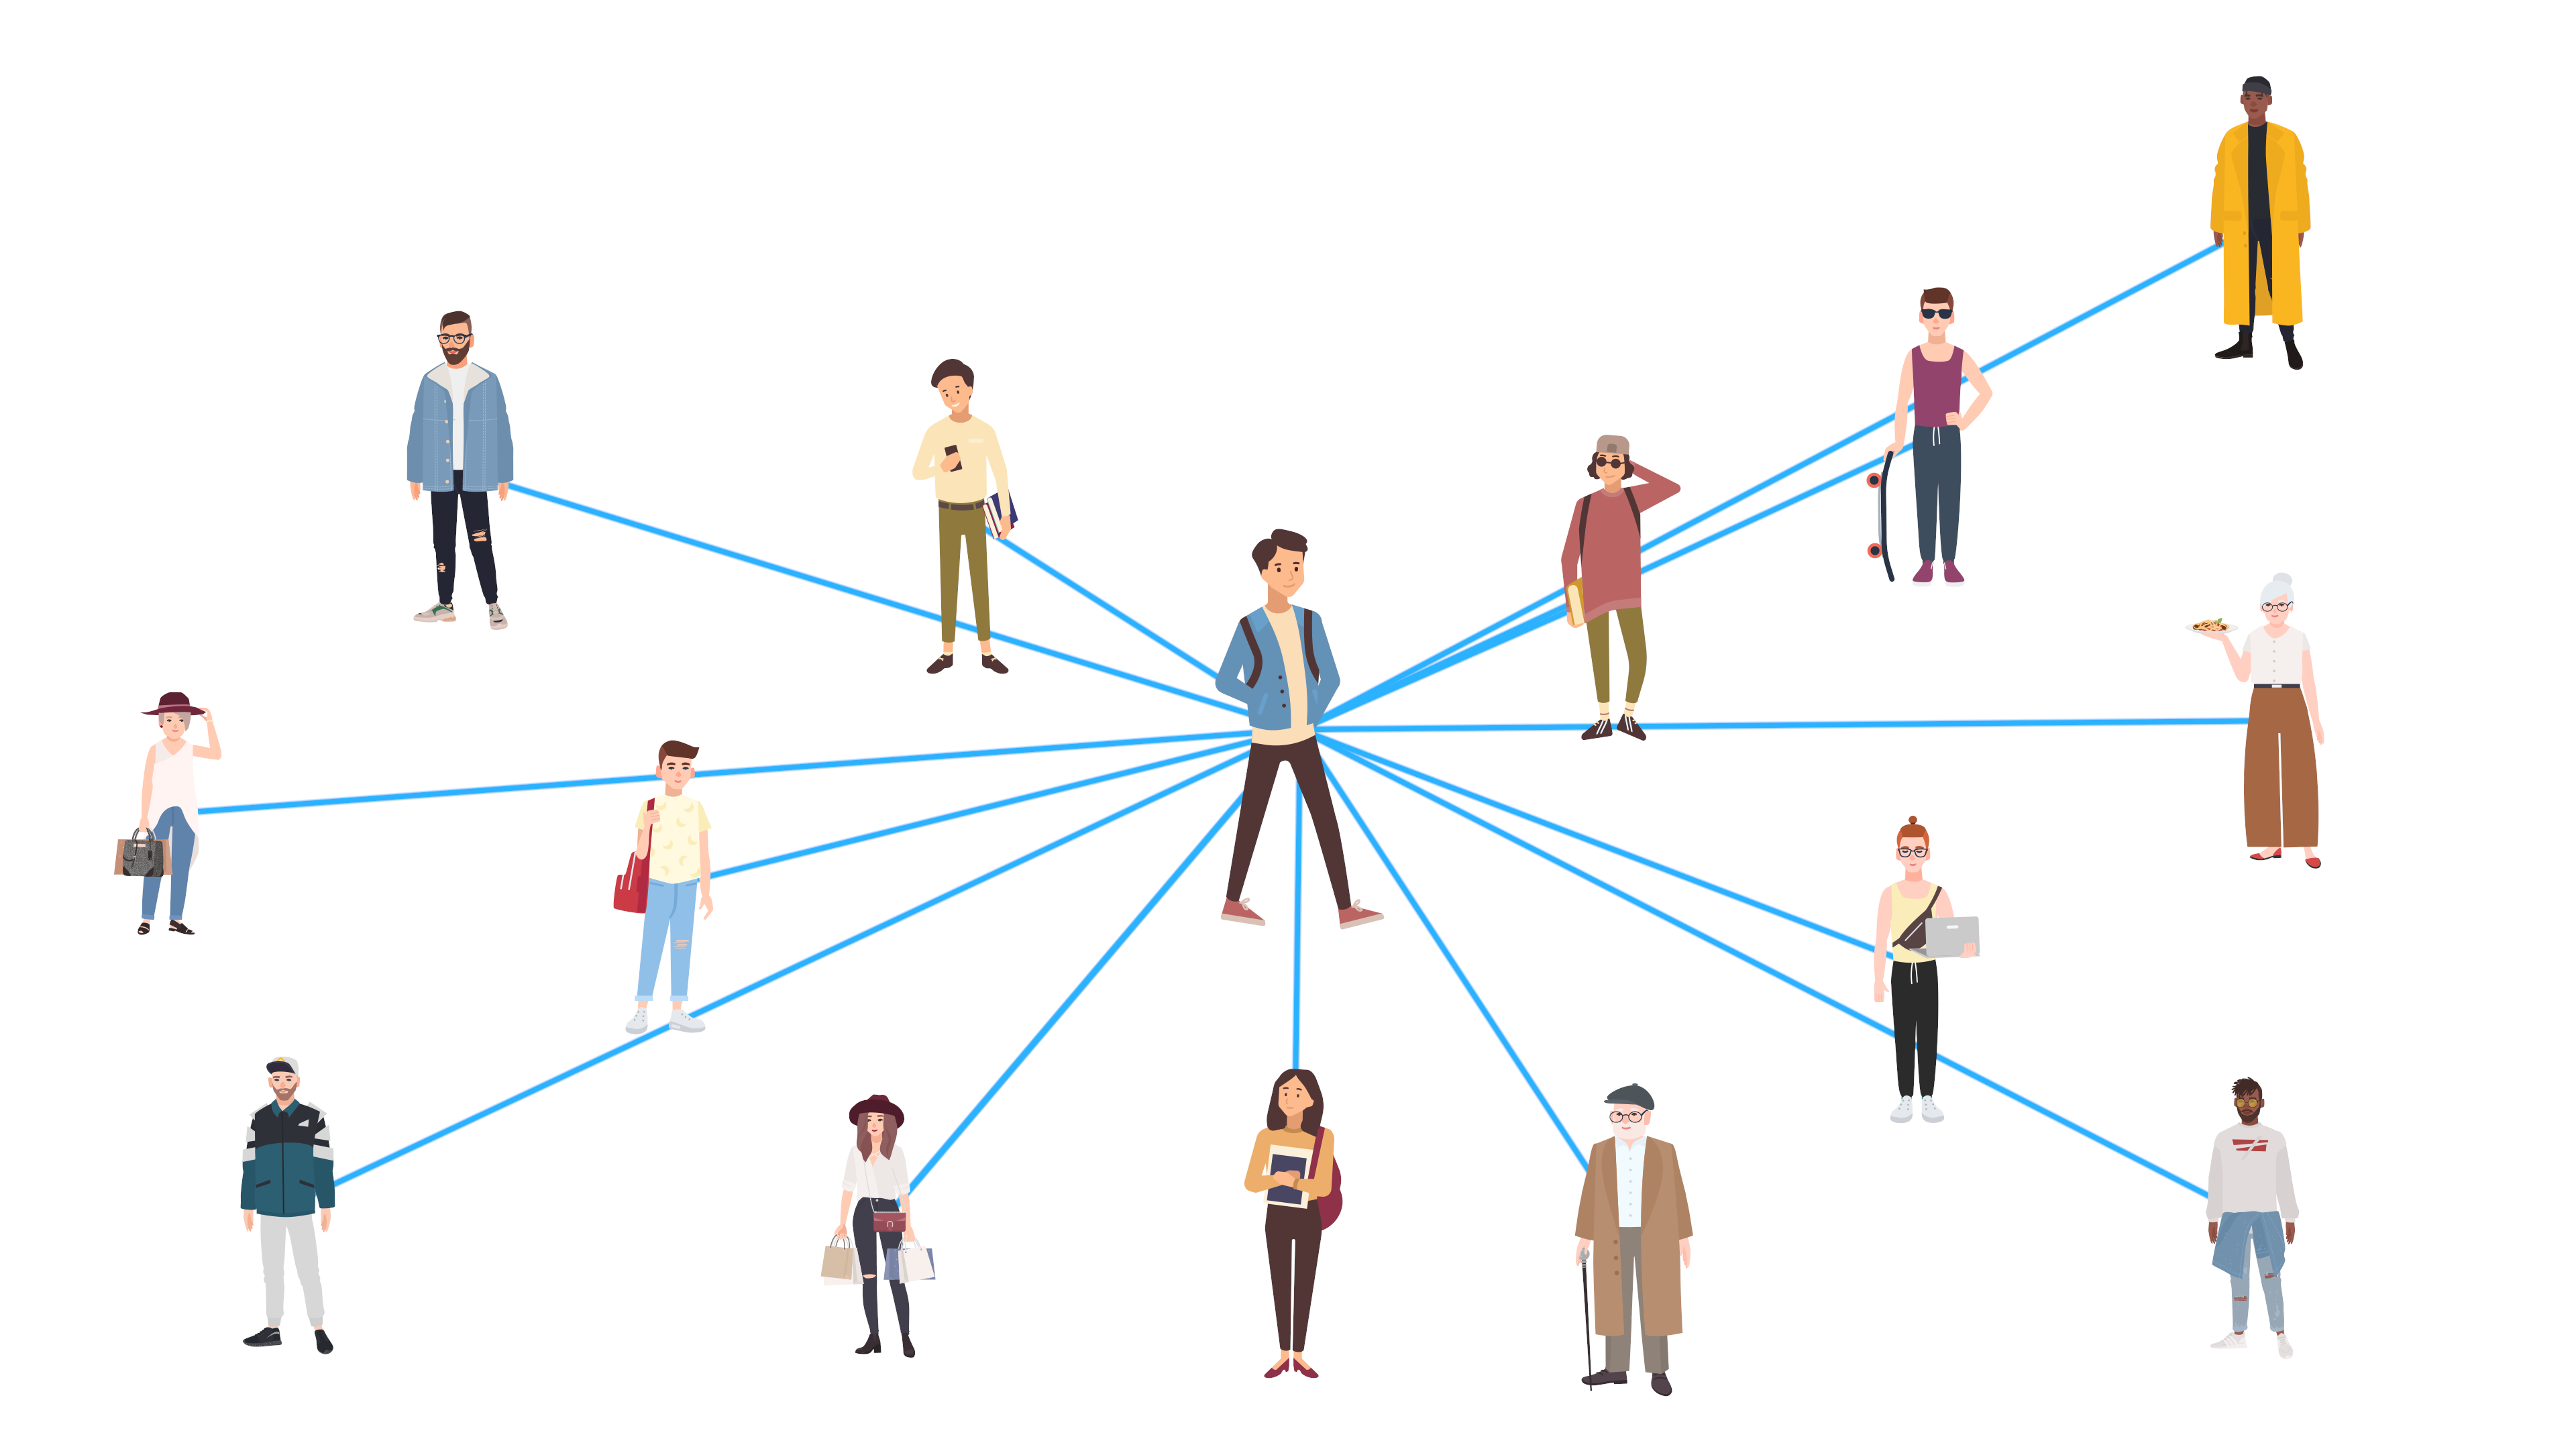 One person in the centre, with a network of people around him.